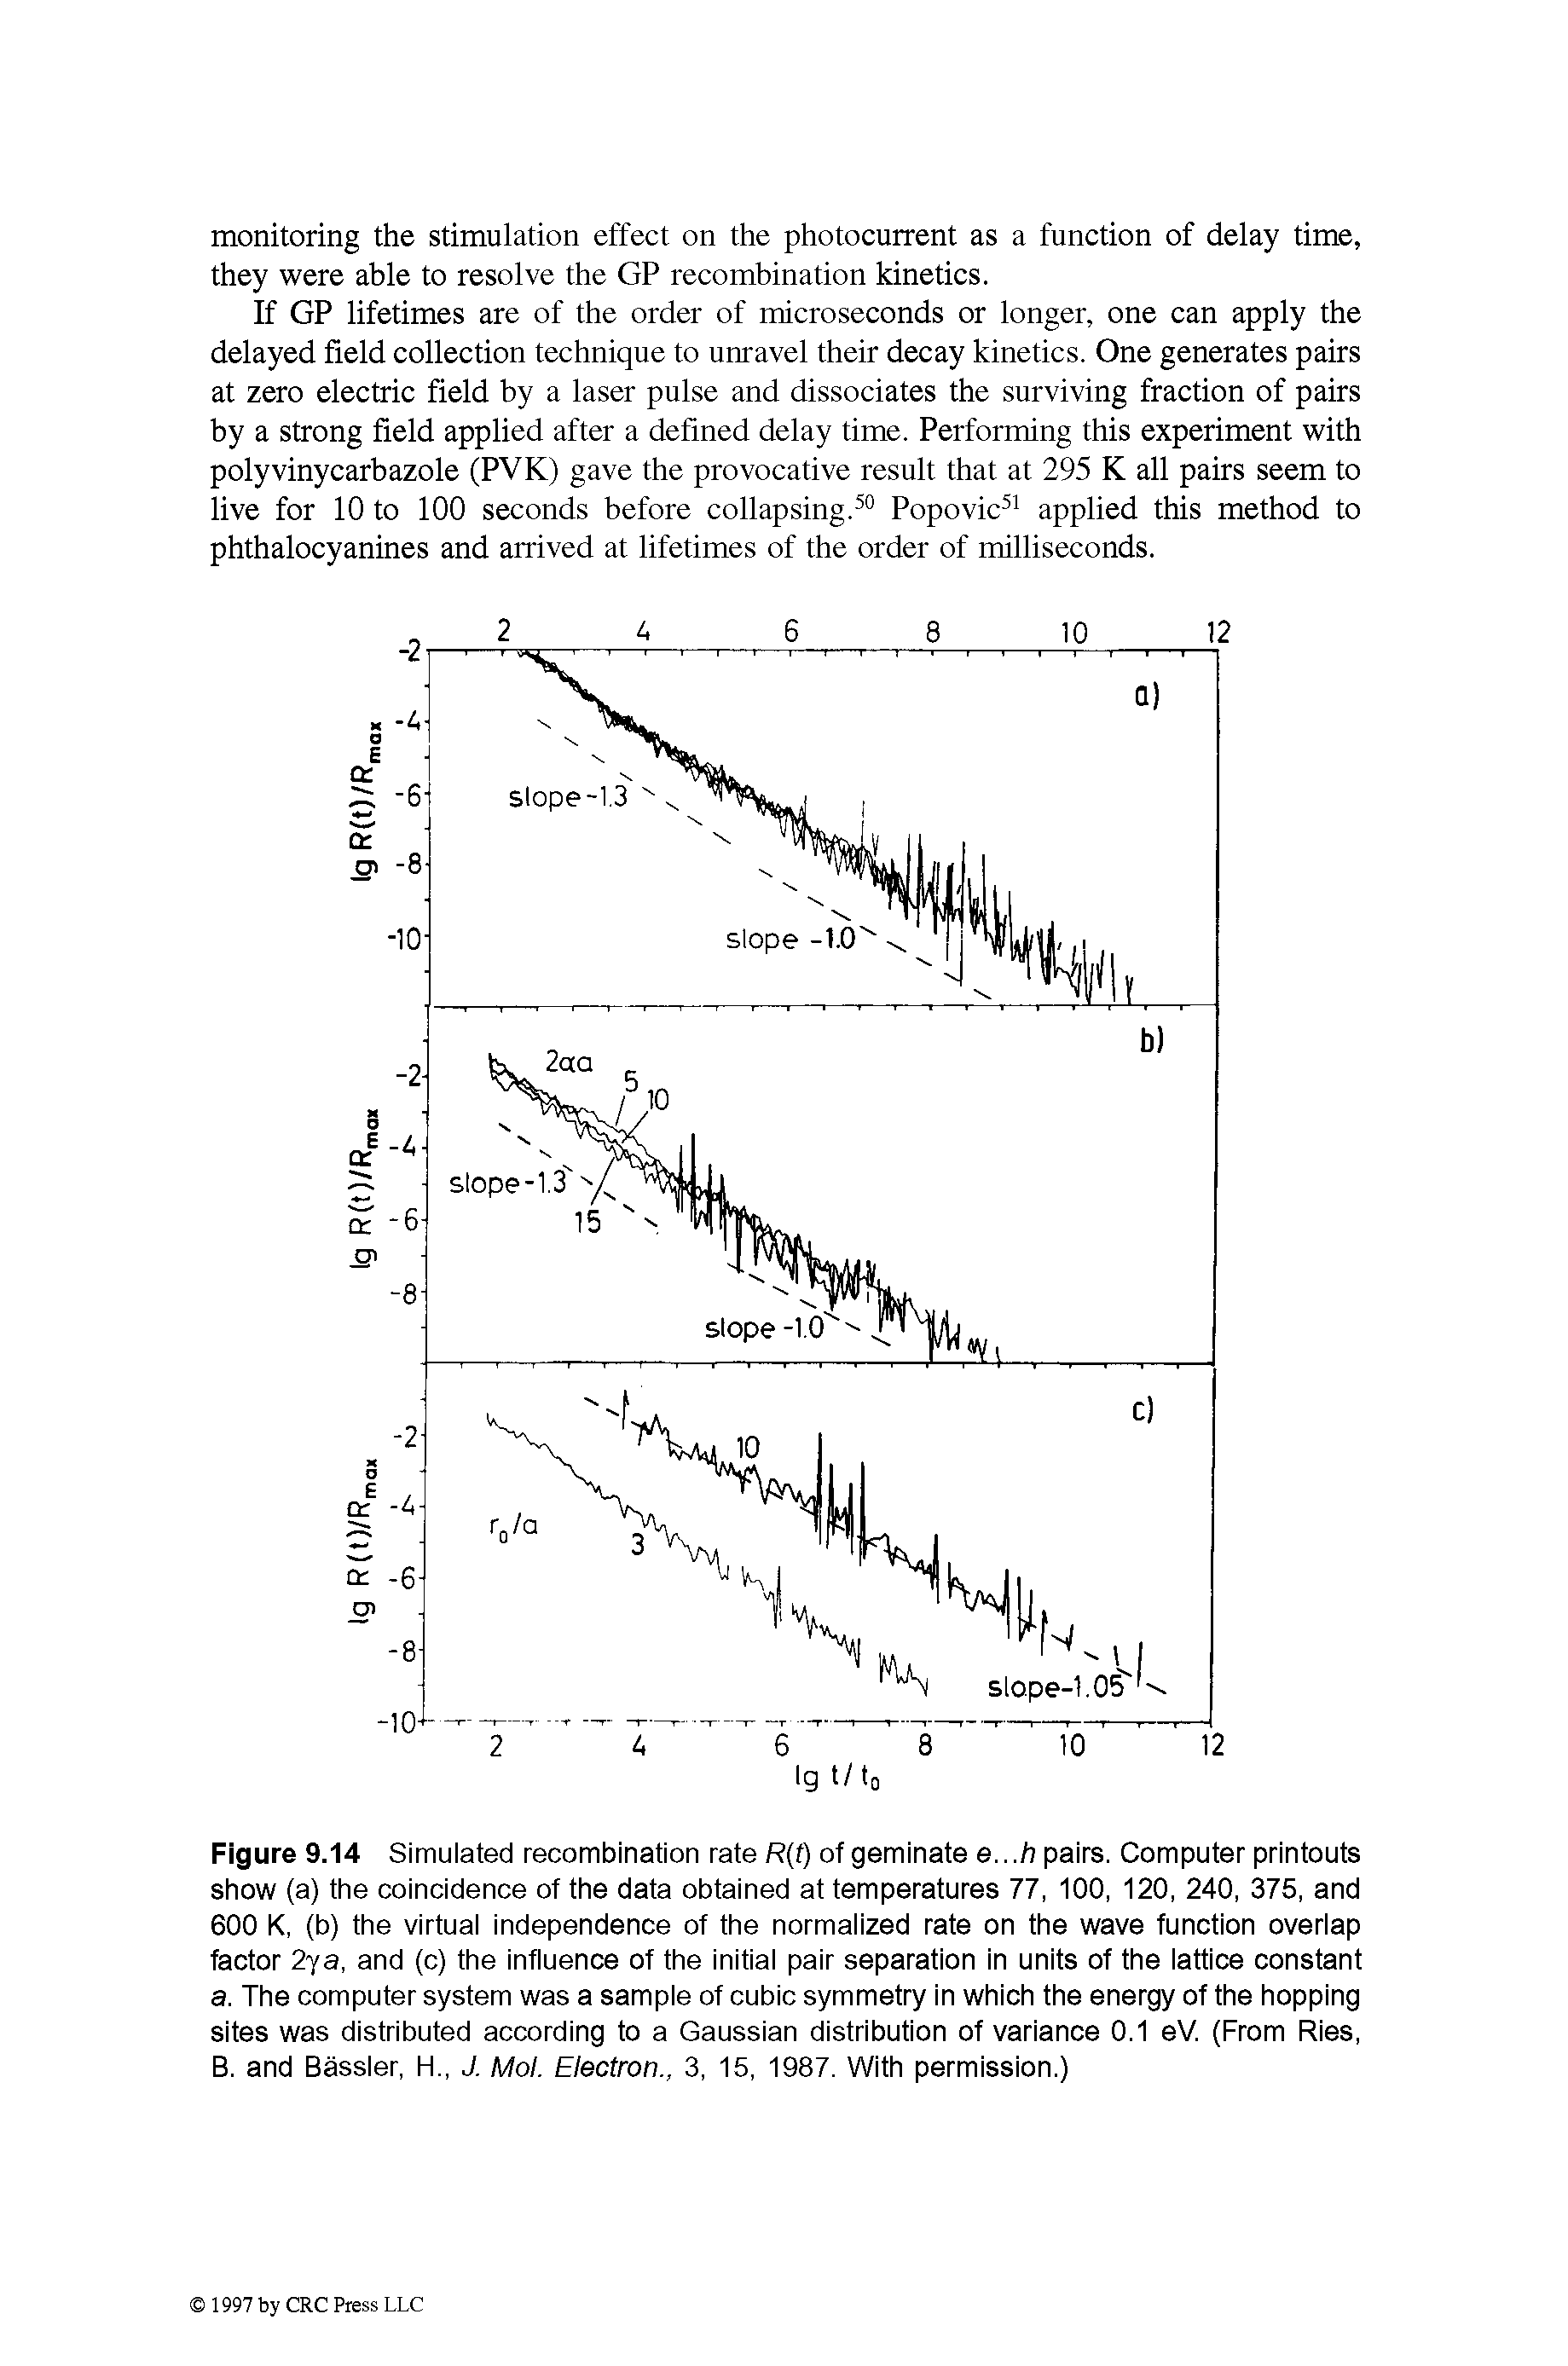 Figure 9.14 Simulated recombination rate R(f) of geminate e...h pairs. Computer printouts show (a) the coincidence of the data obtained at temperatures 77, 100, 120, 240, 375, and 600 K, (b) the virtual independence of the normalized rate on the wave function overlap factor 2ya, and (c) the influence of the initial pair separation in units of the lattice constant a. The computer system was a sample of cubic symmetry in which the energy of the hopping sites was distributed according to a Gaussian distribution of variance 0.1 eV. (From Ries, B. and Bassler, H., J. Mol. Electron., 3, 15, 1987. With permission.)...